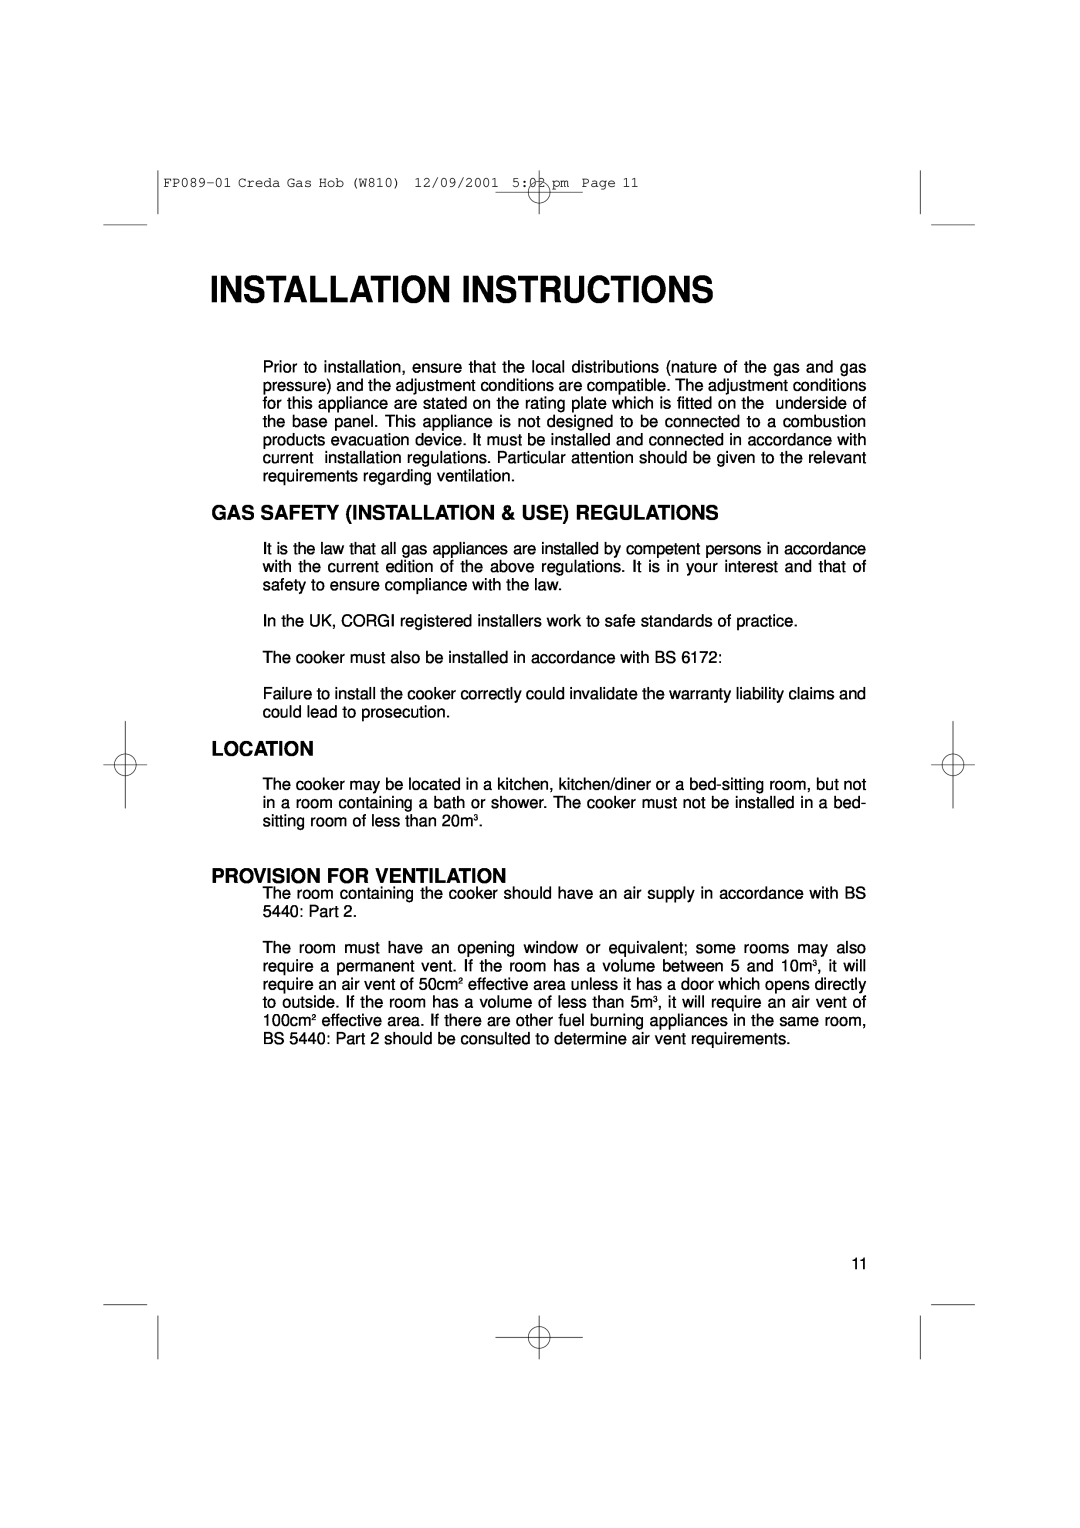 Creda W810 manual Gas Safety Installation & Use Regulations, Location, Provision For Ventilation, Installation Instructions 